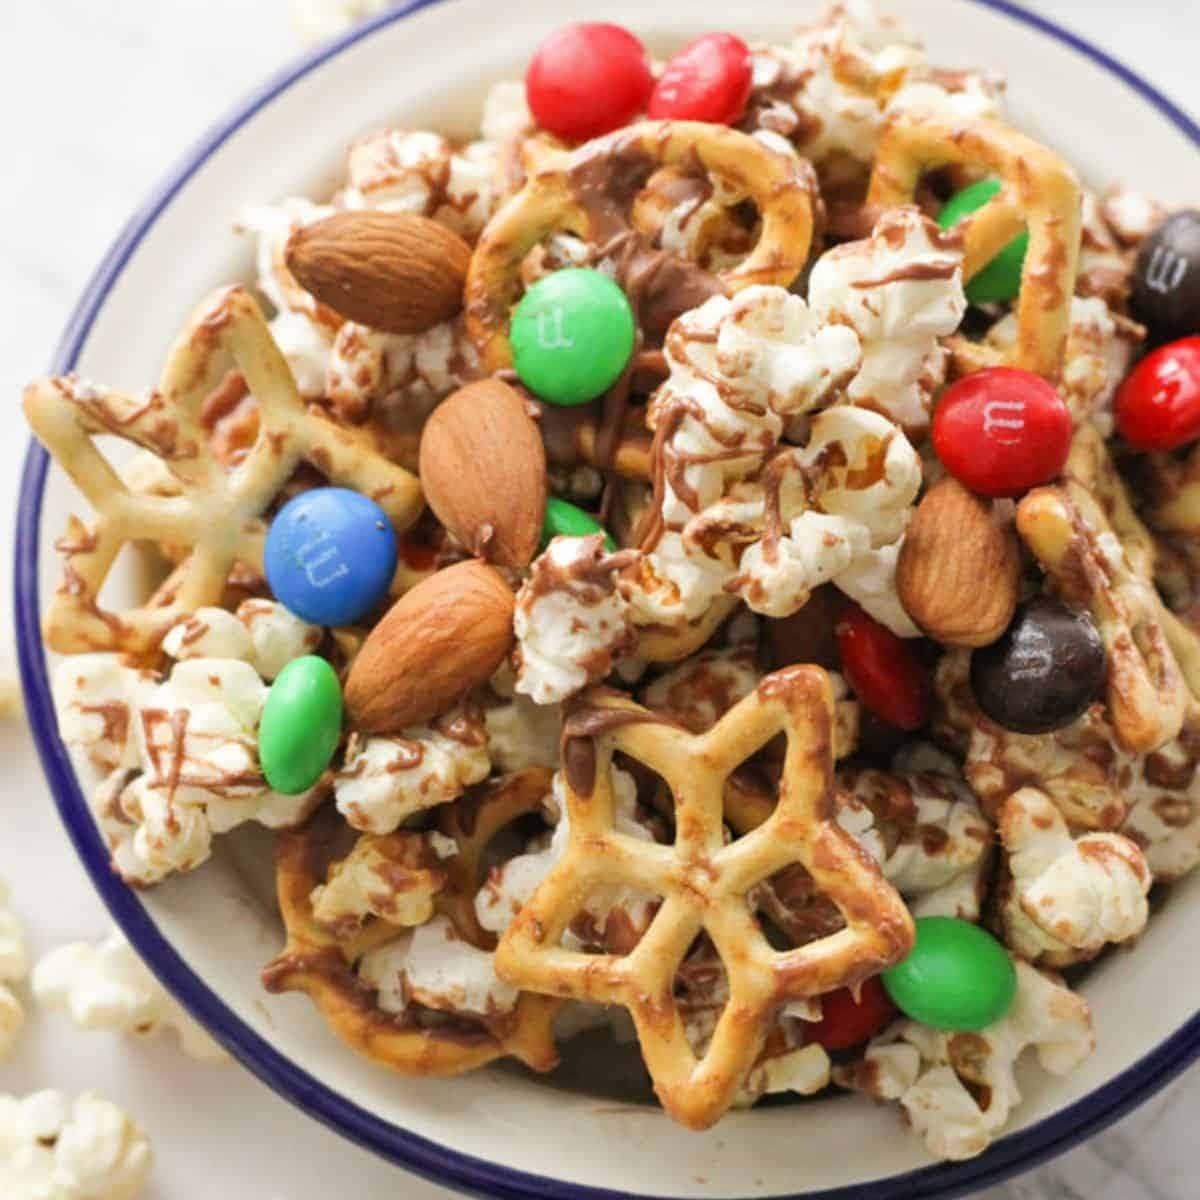 A Bowl Of Popcorn With Candy And Nuts